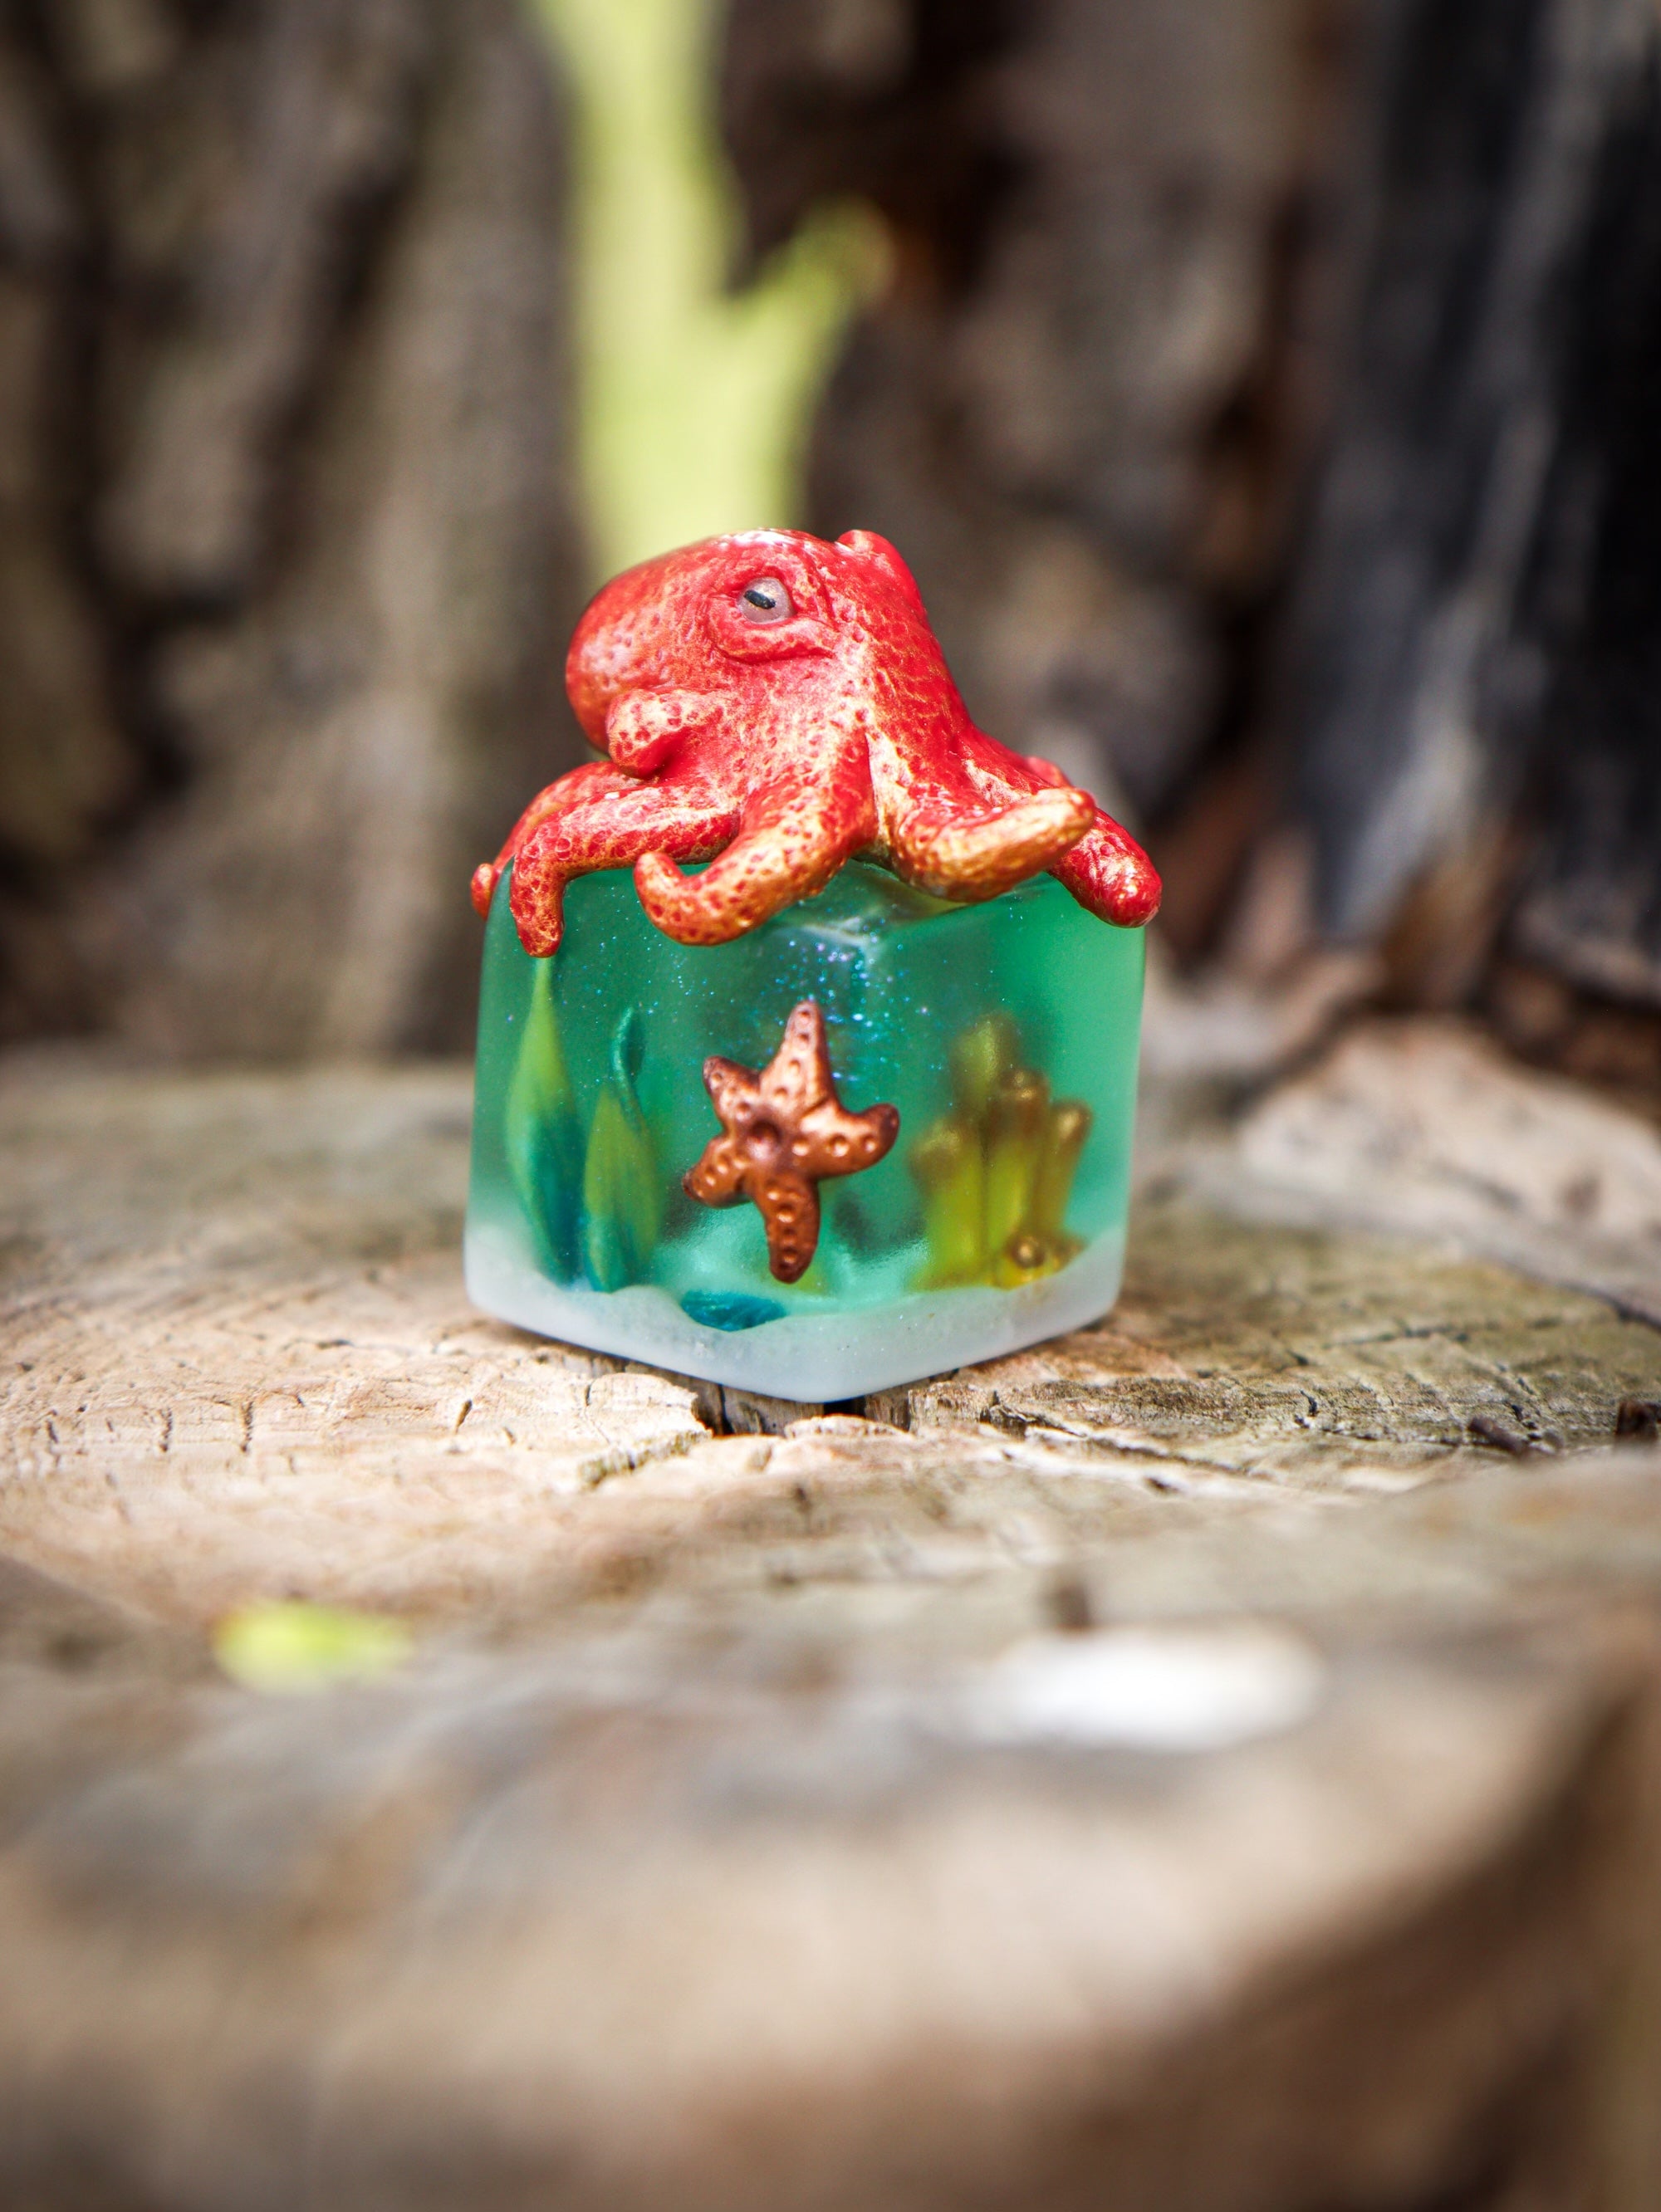 A whimsical toy sculpture titled Little Shit Big Deal - CUBES by Fairies And Fancies, featuring a small red octopus on a green cube. Sculpted by Dr. Polpz.